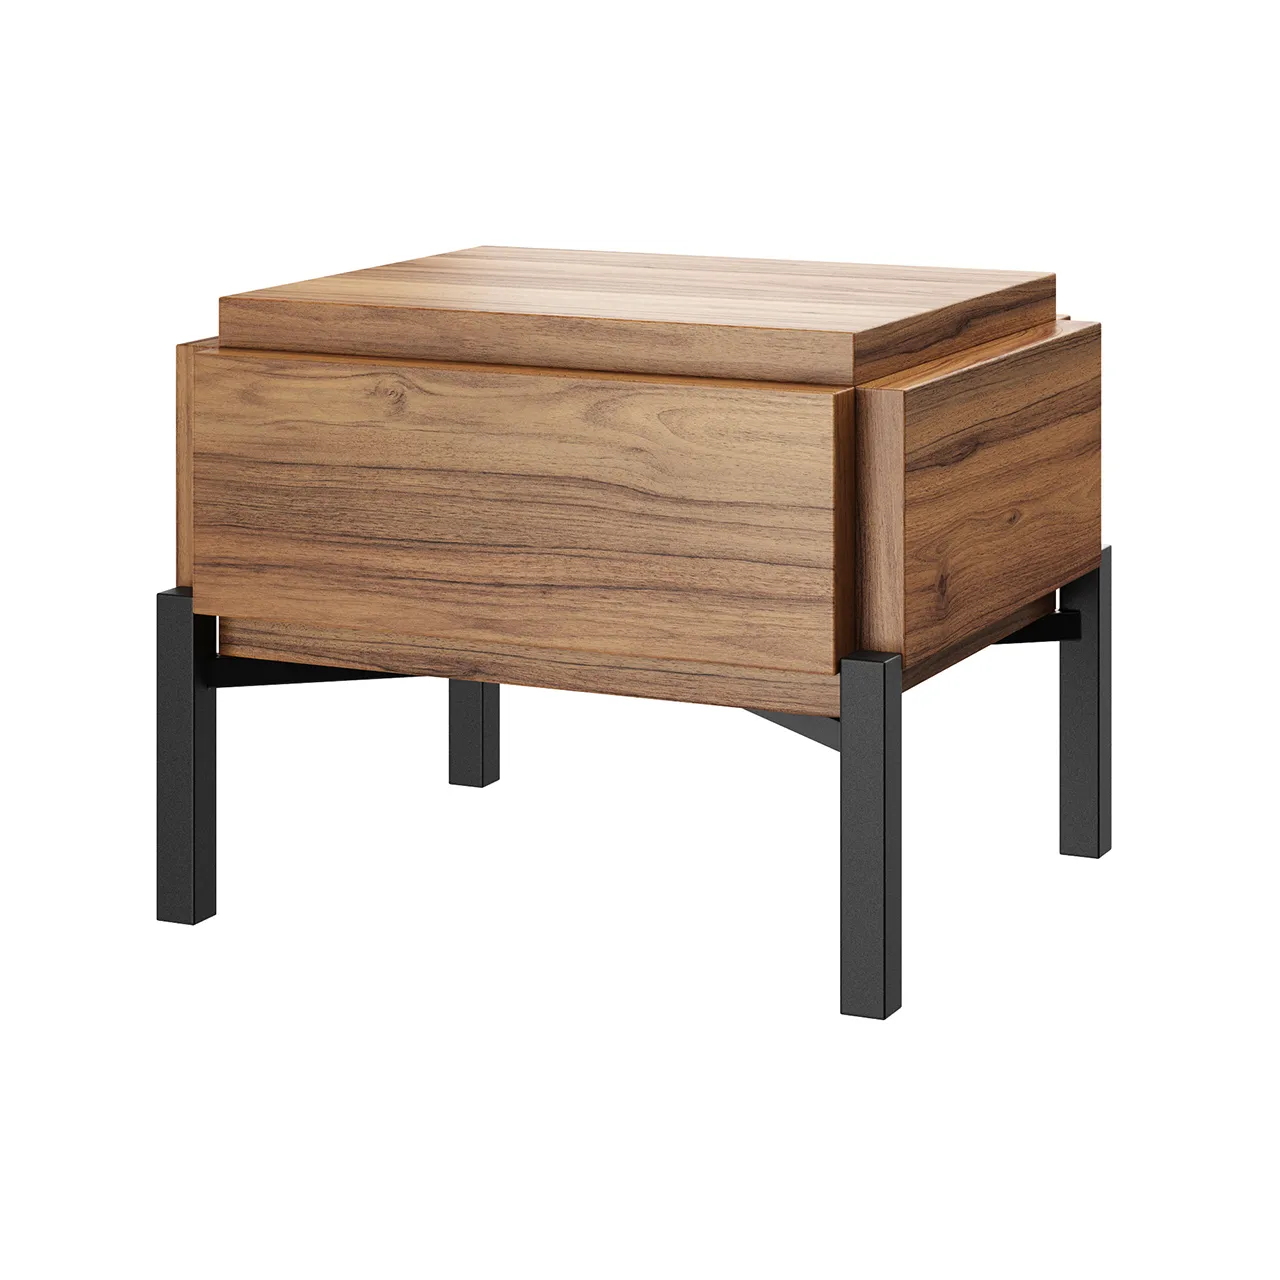 Furniture – groove-bedside-table-one-drawer-by-bonaldo